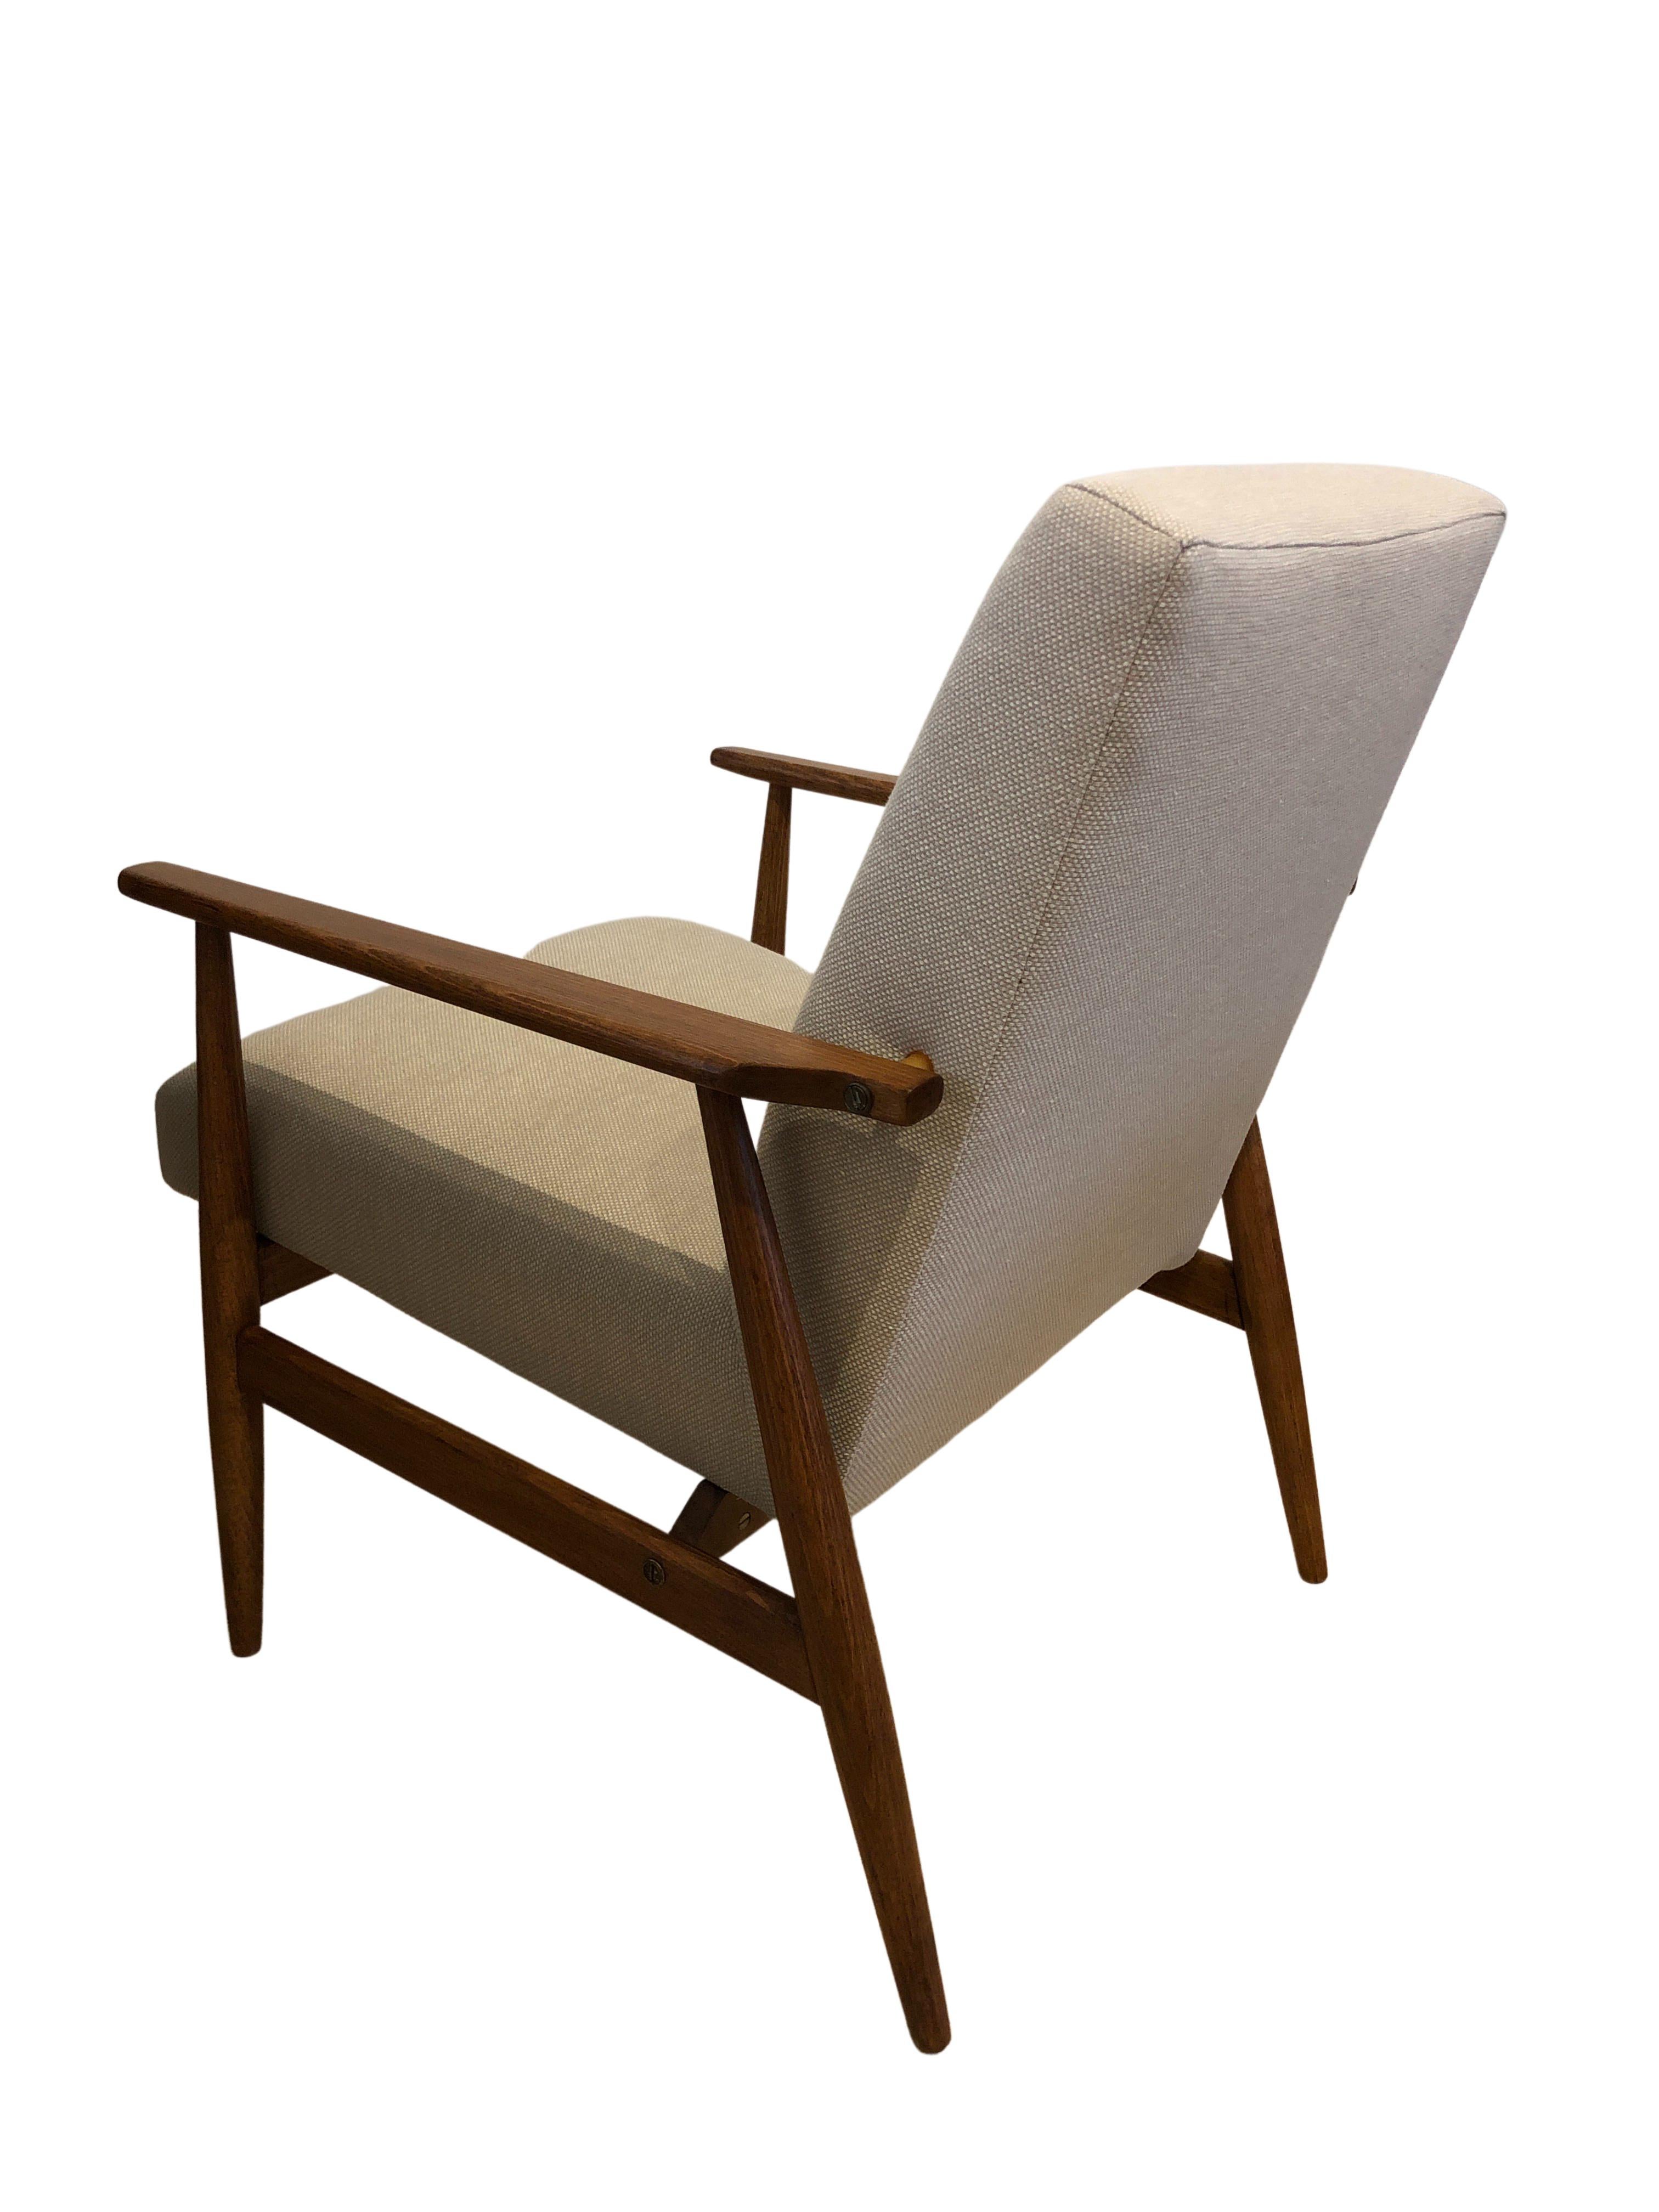 20th Century Midcentury Armchair by Henryk Lis in Beige Cotton Linen Upholstery, 1960s For Sale